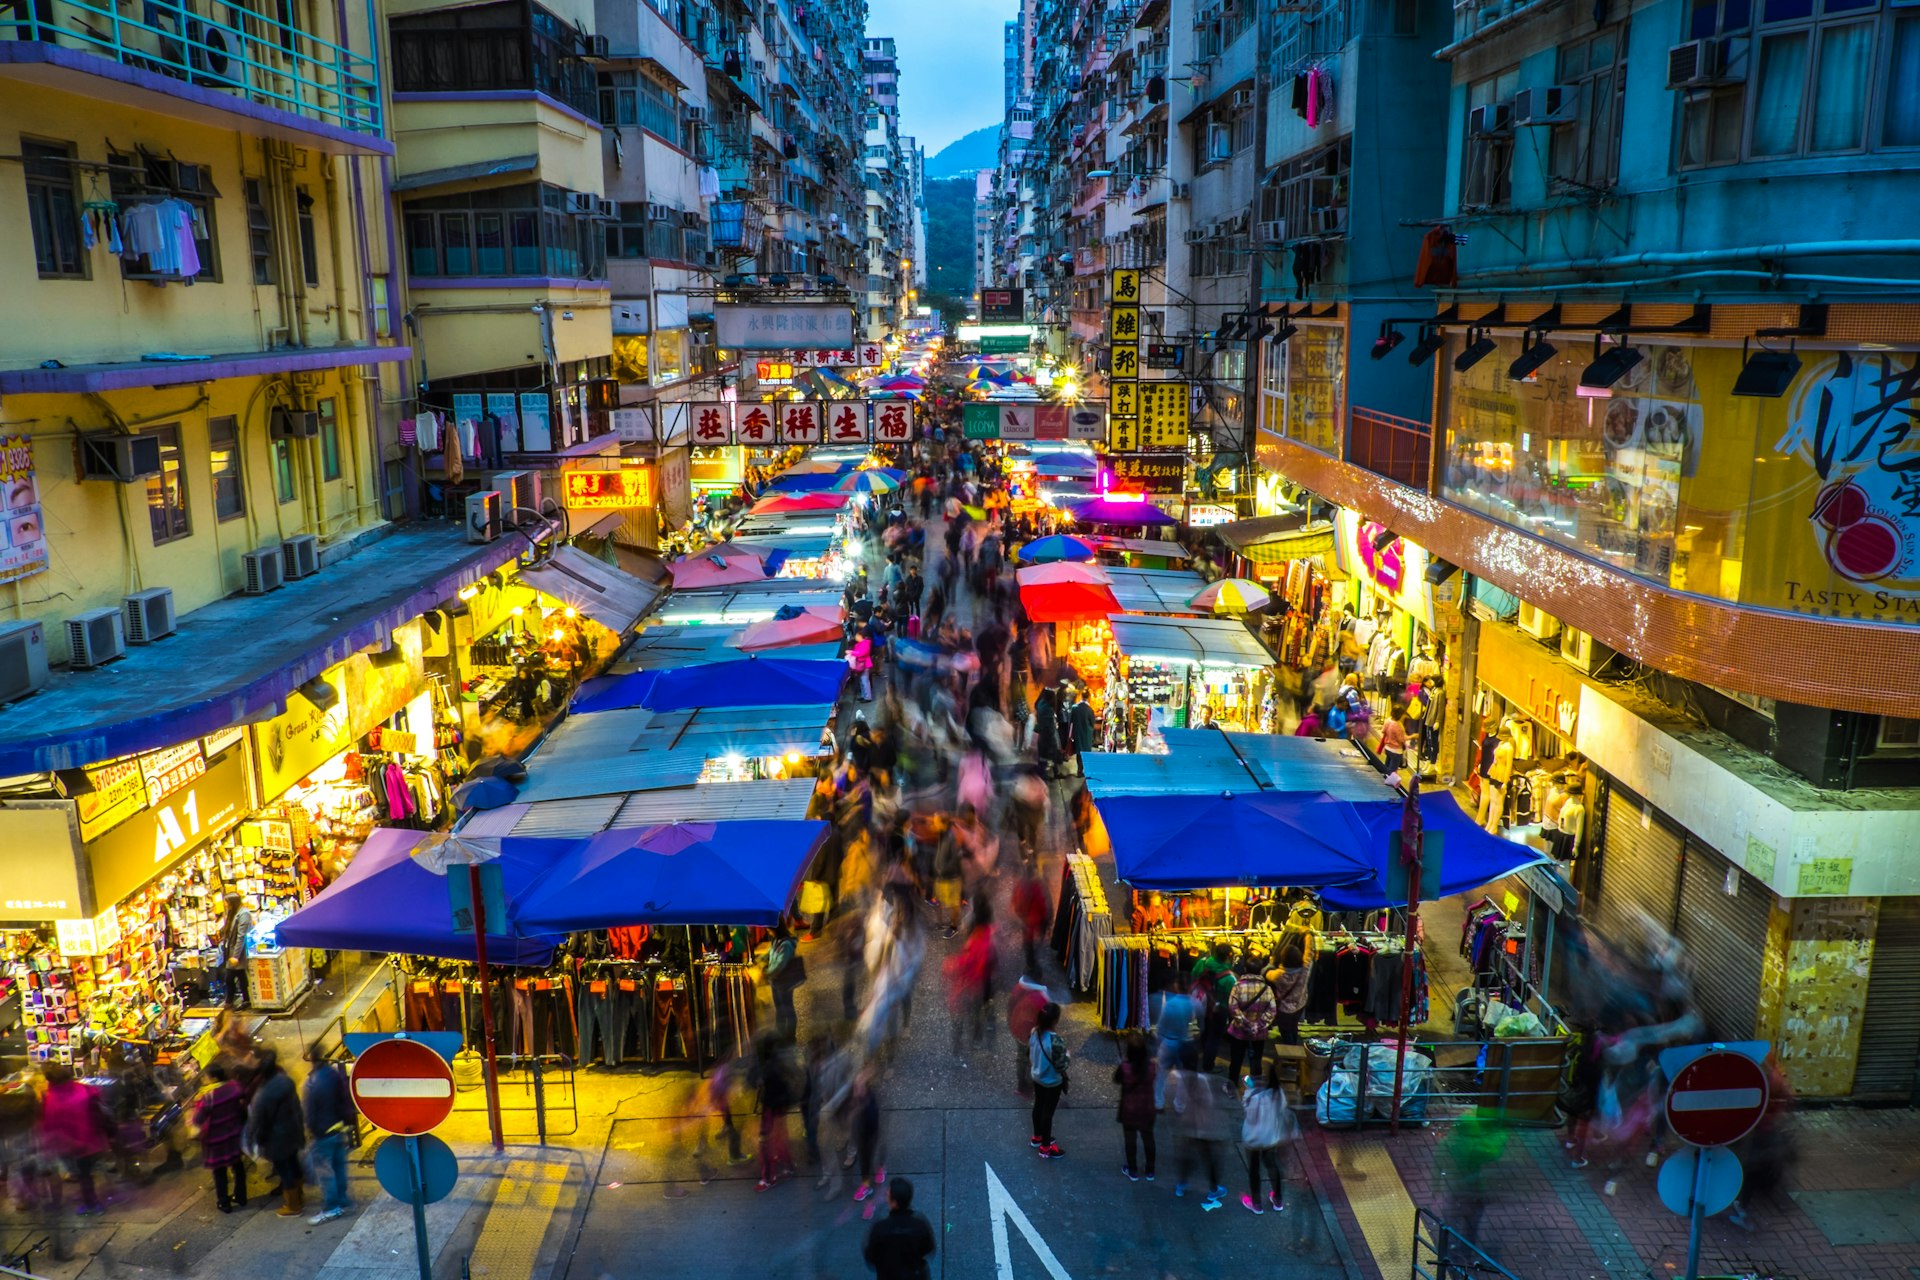 Endless crowds at a night market in Mongkok district.